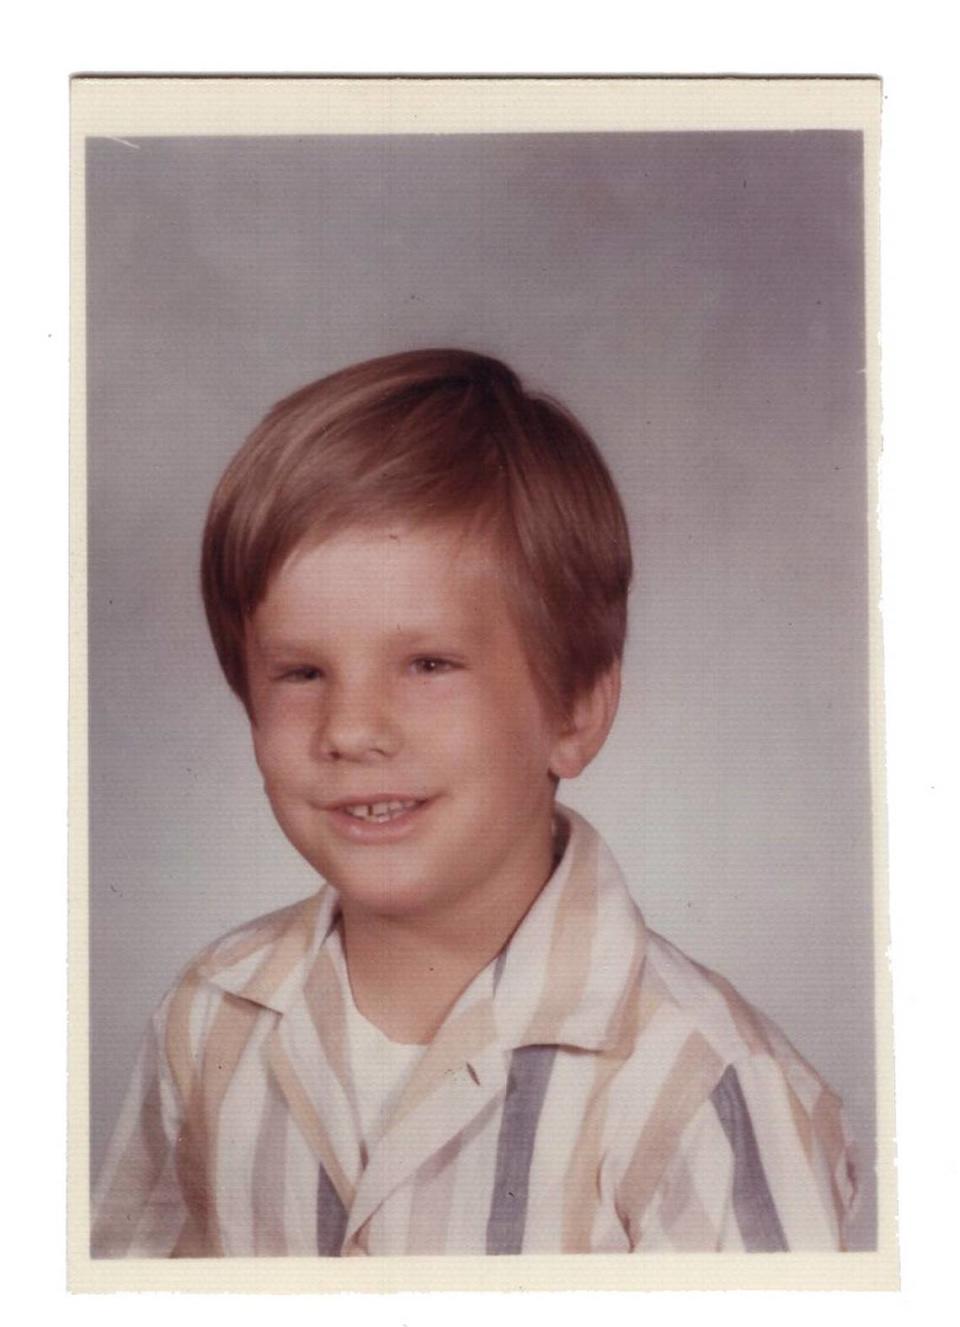 Jim Kletzing pictured at 7 years old in second grade, circa 1970. The back of the photograph notes “The crooked front tooth (from a fall on his bicyle) is a baby tooth – so it will be OK. “ This photograph was sold at Schiff Estate Services on a Del Paso Boulevard in Sacramento in December.